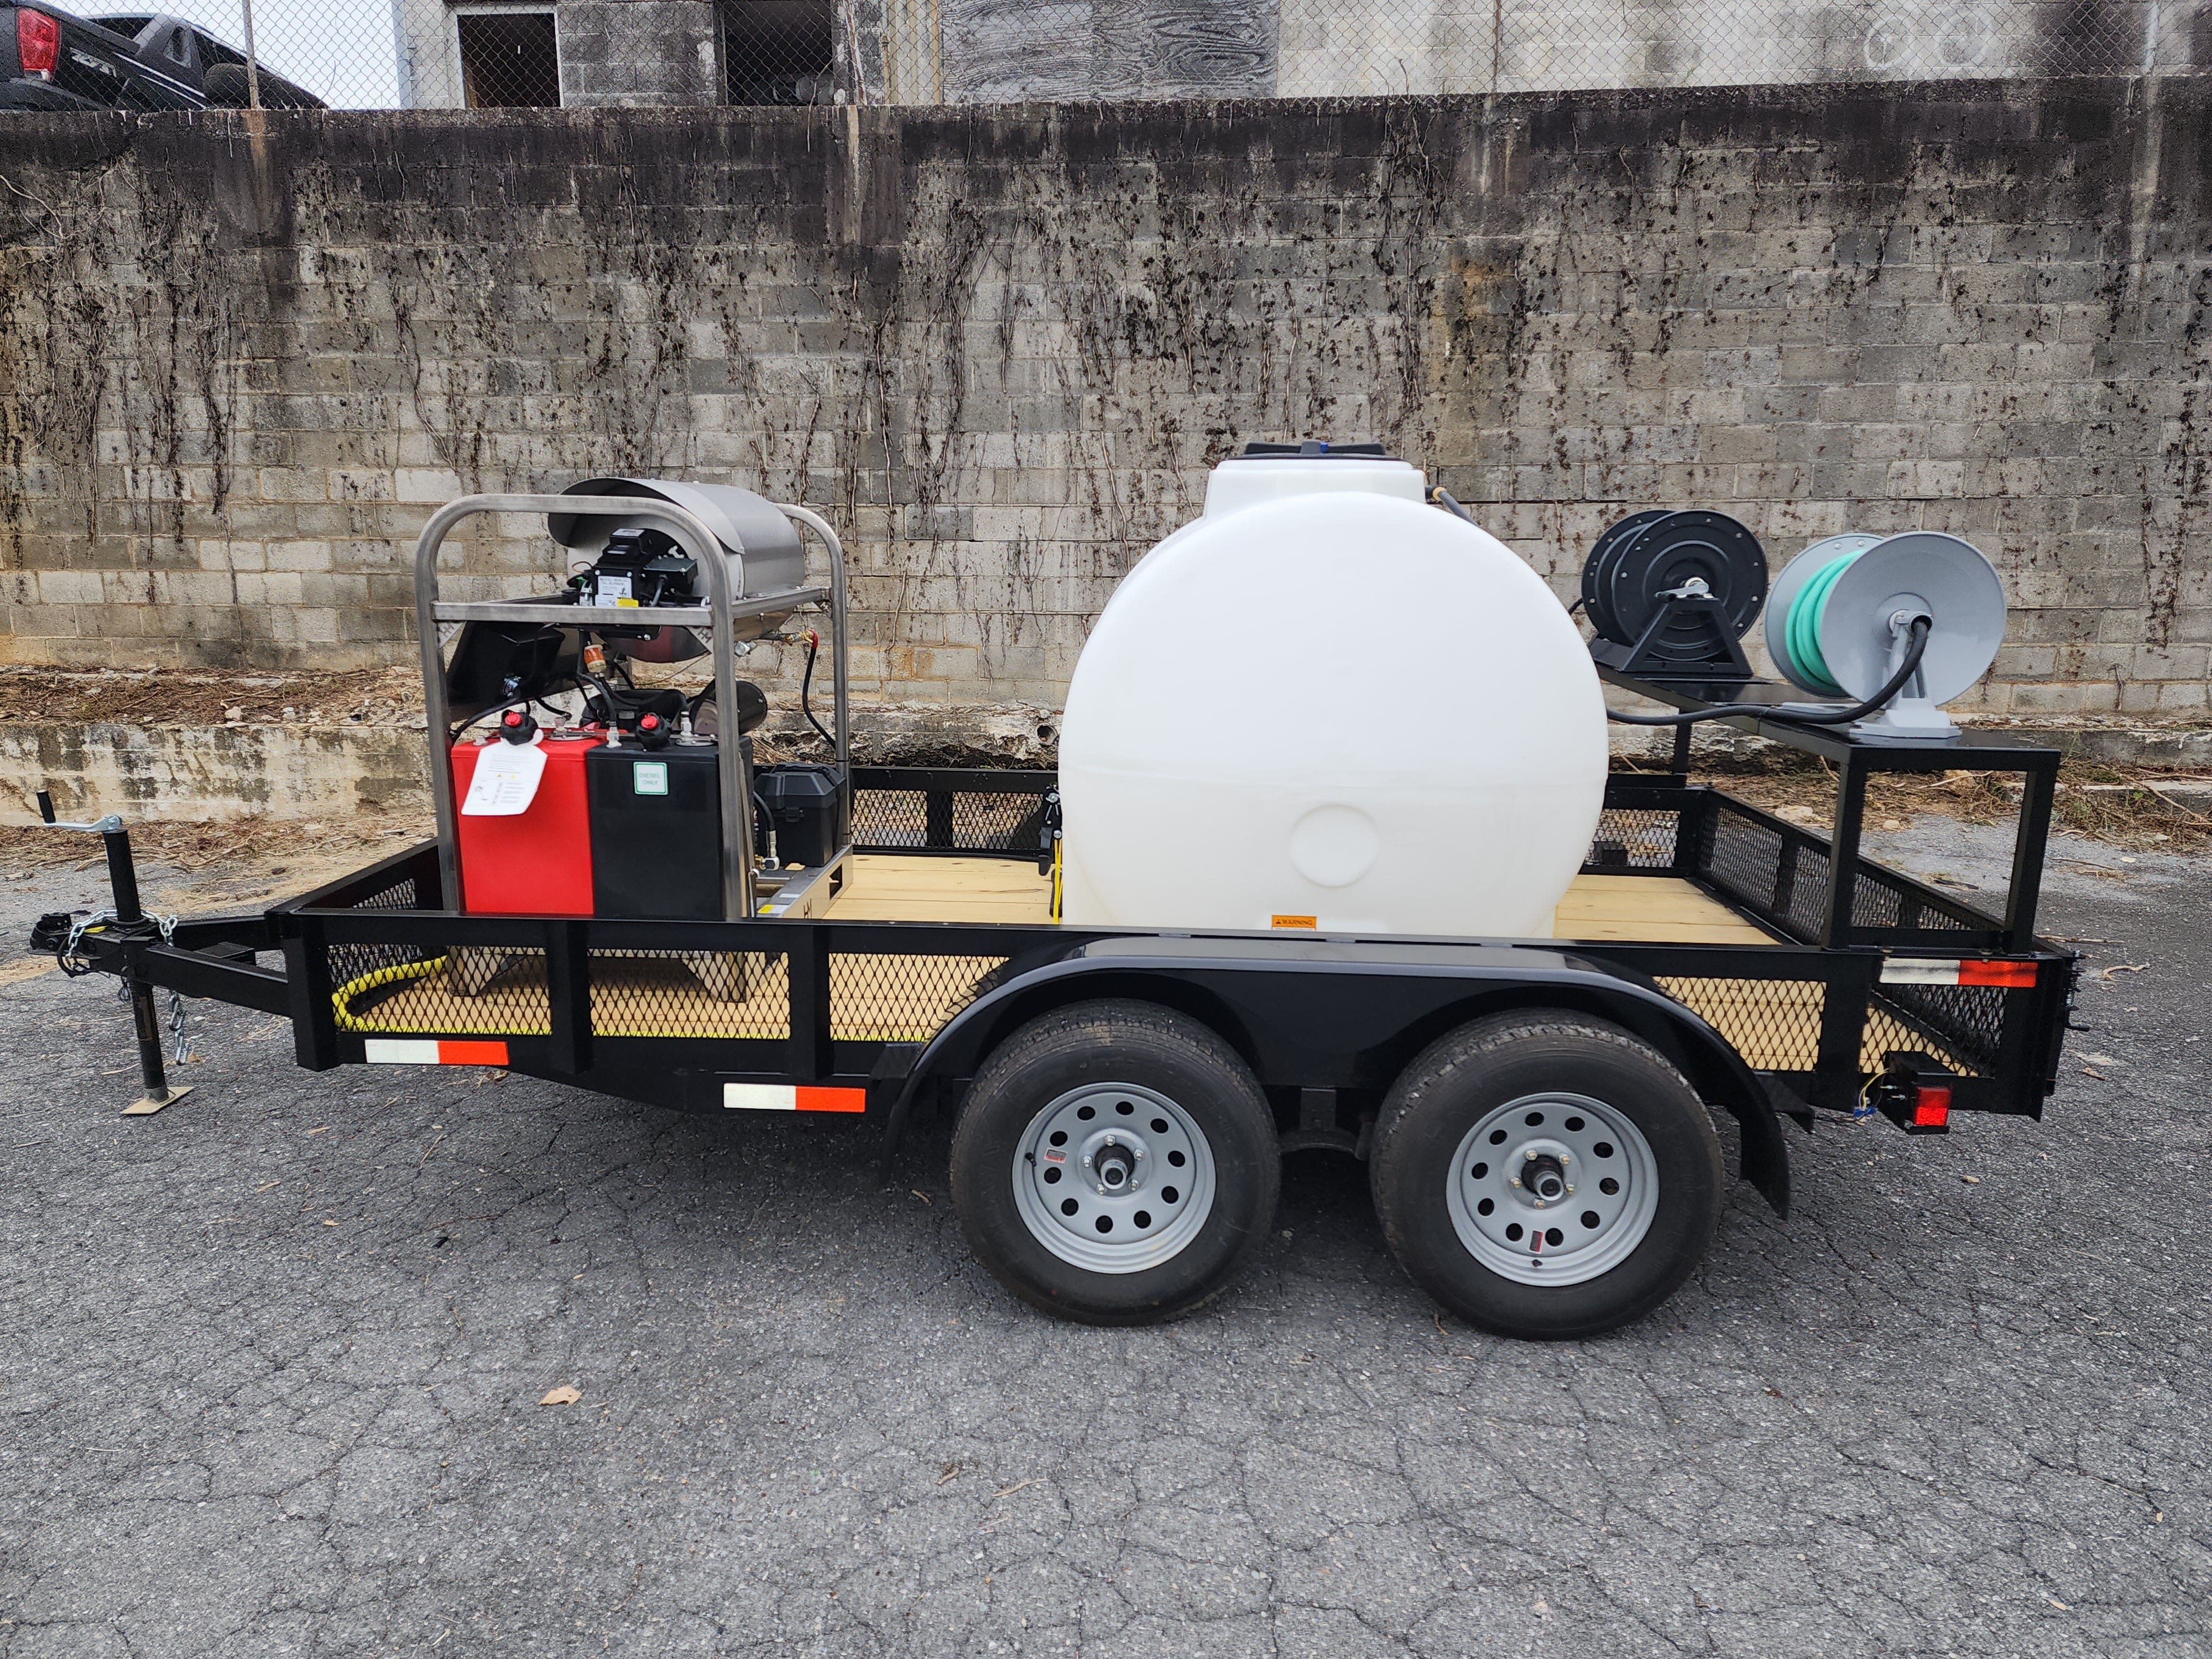 Hydro Max 10gpm at 3500psi- Hot Water Trailer Package-GX Honda-Fuel Injected Pressure Washer Trailer Package BCE Cleaning Systems 